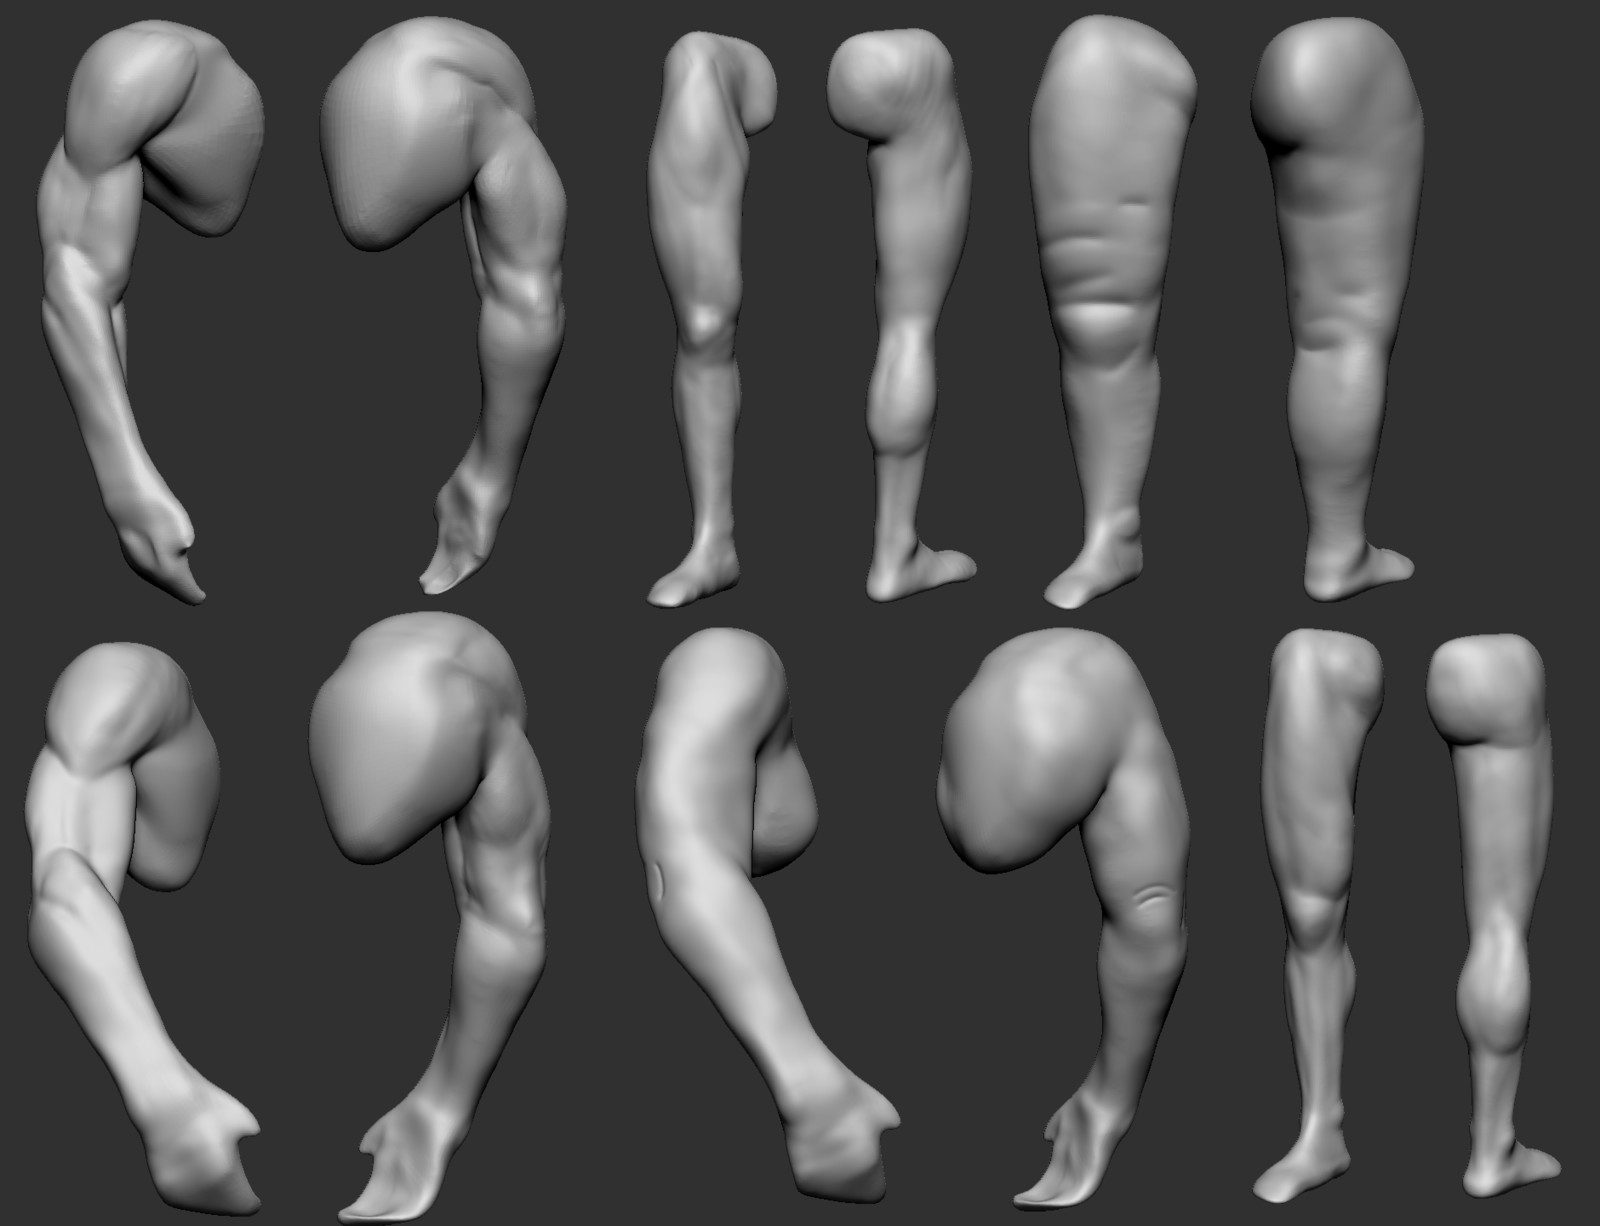 Week 2 Arm and Leg Anatomy Studies #2. (Done individually, but screenshots were too small to upload, combined for Artstation).